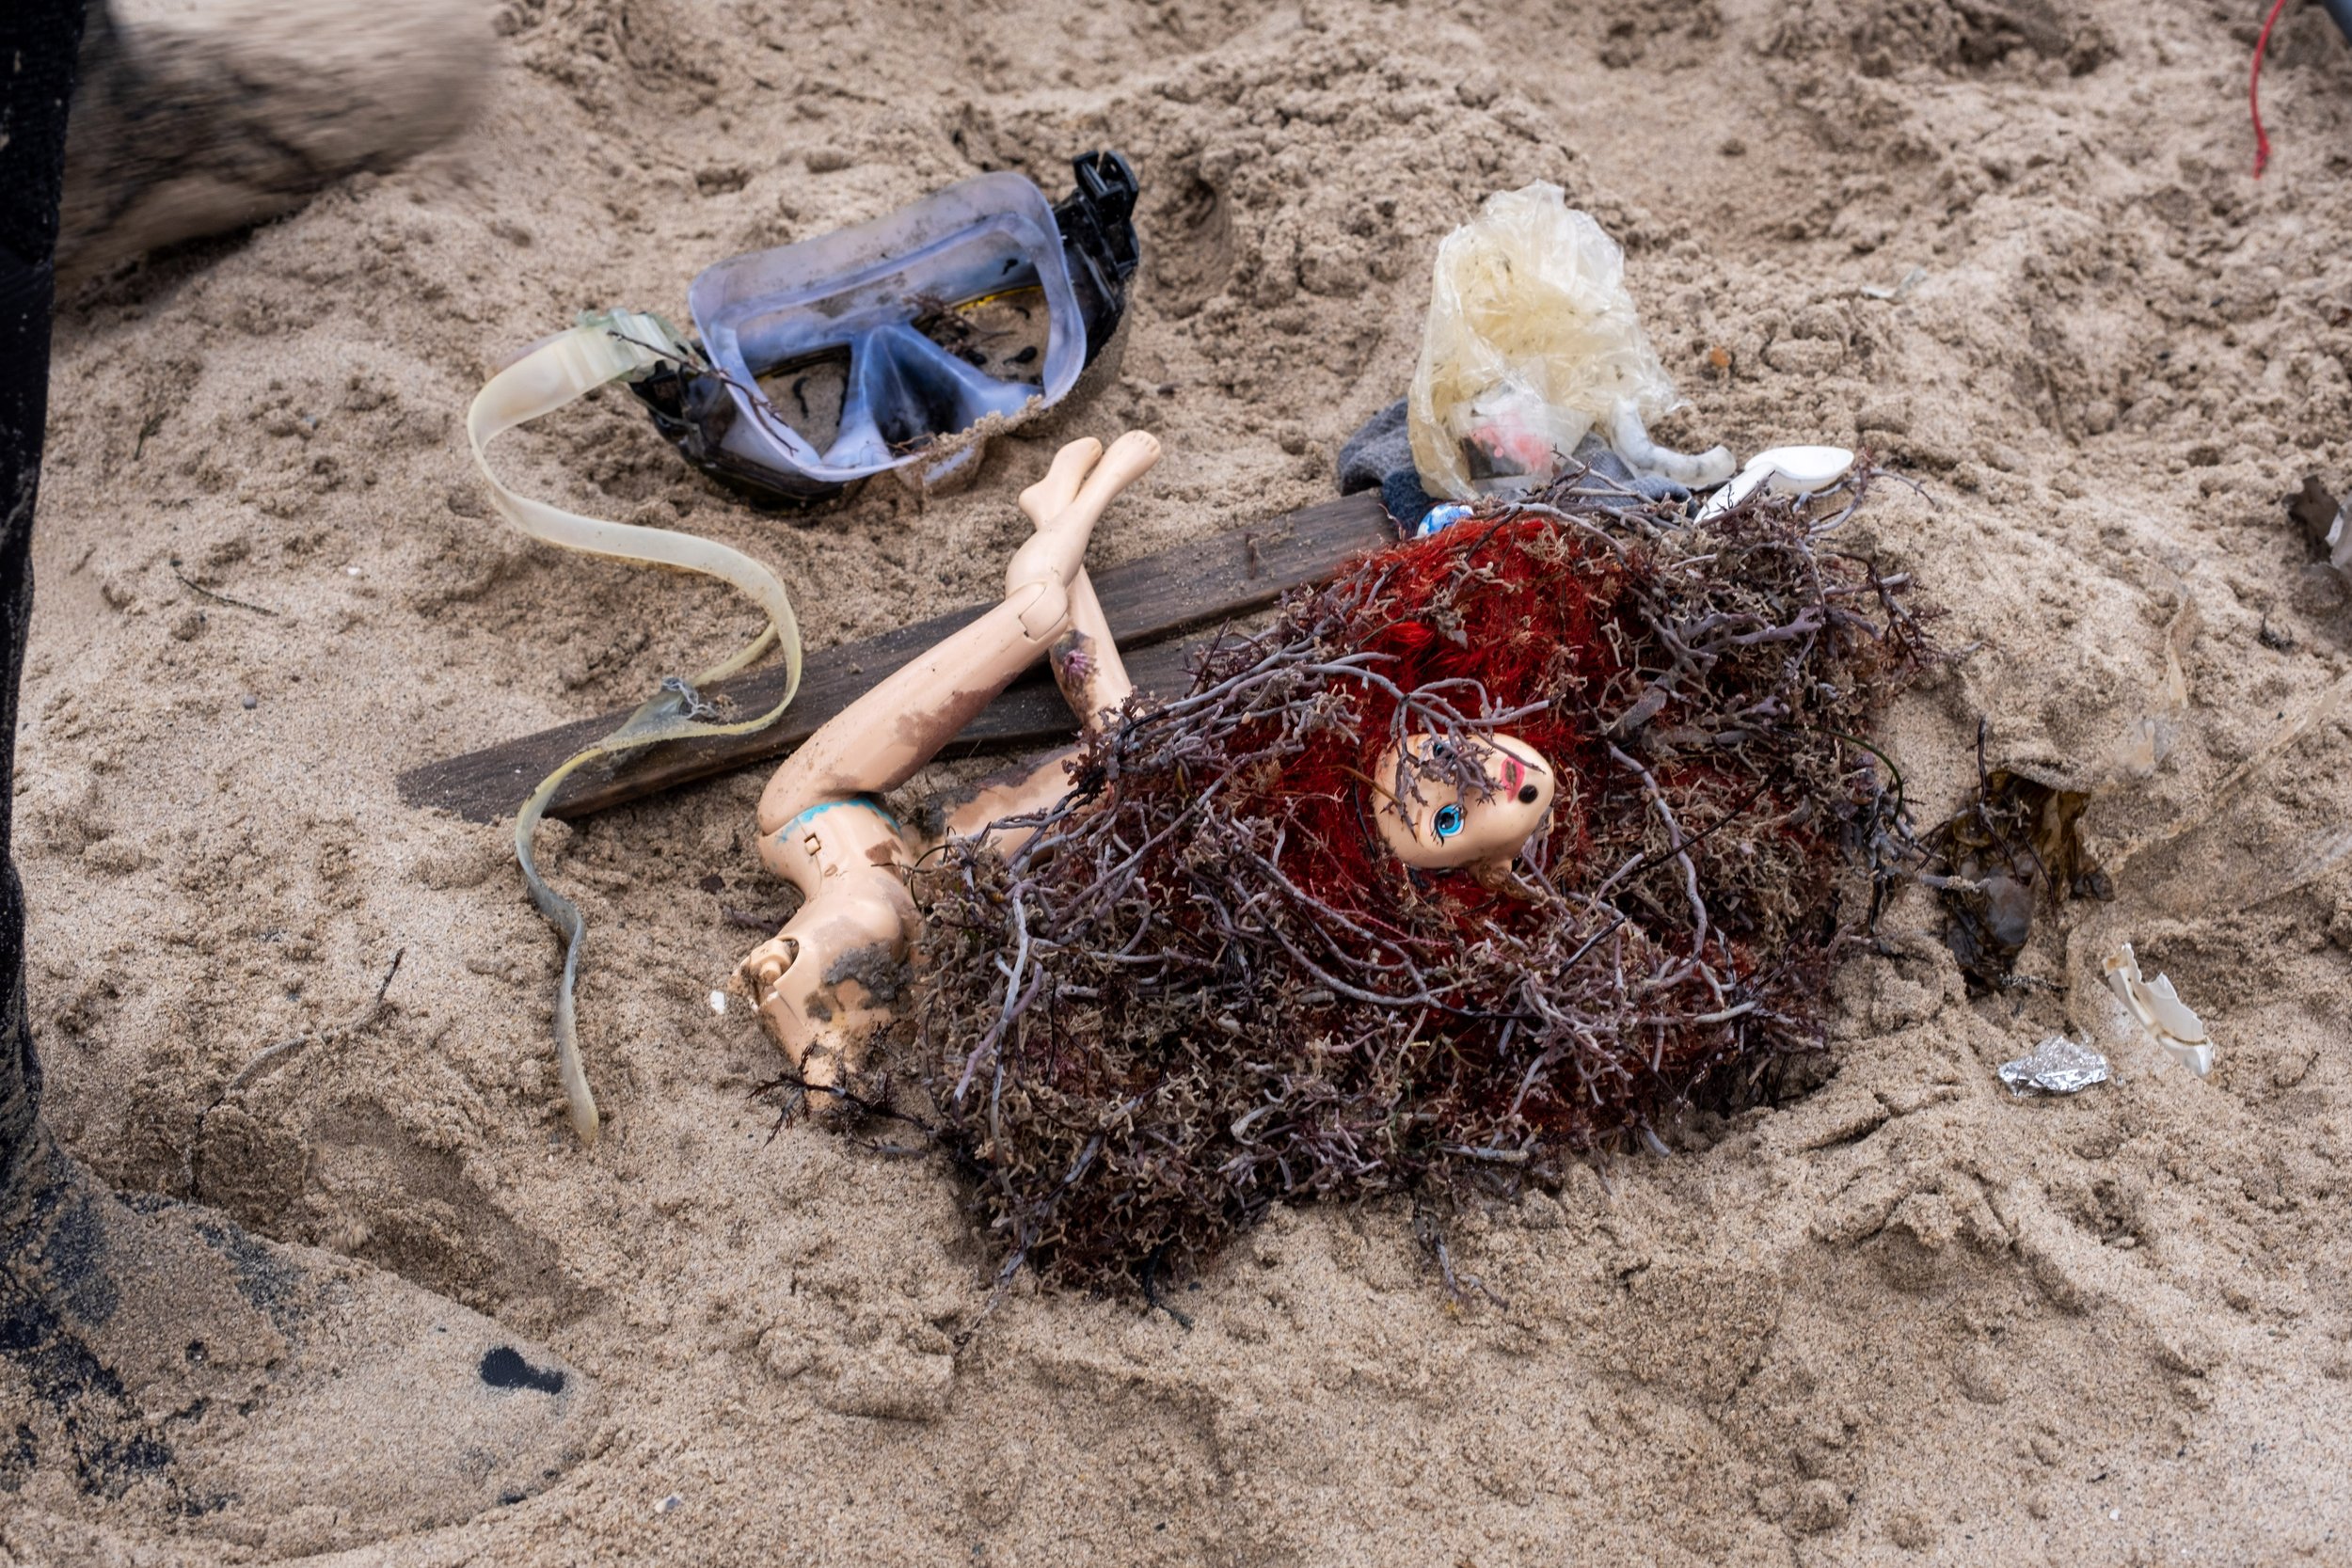  A plastic toy doll is engulfed by seaweed, part of the trash findings by members of Eco Dive Center who participated at the Coastal Cleanup Day, led by Heal The Bay in Santa Monica Calif. on Saturday, September 17, 2022. (Anna Sophia Moltke | The Co